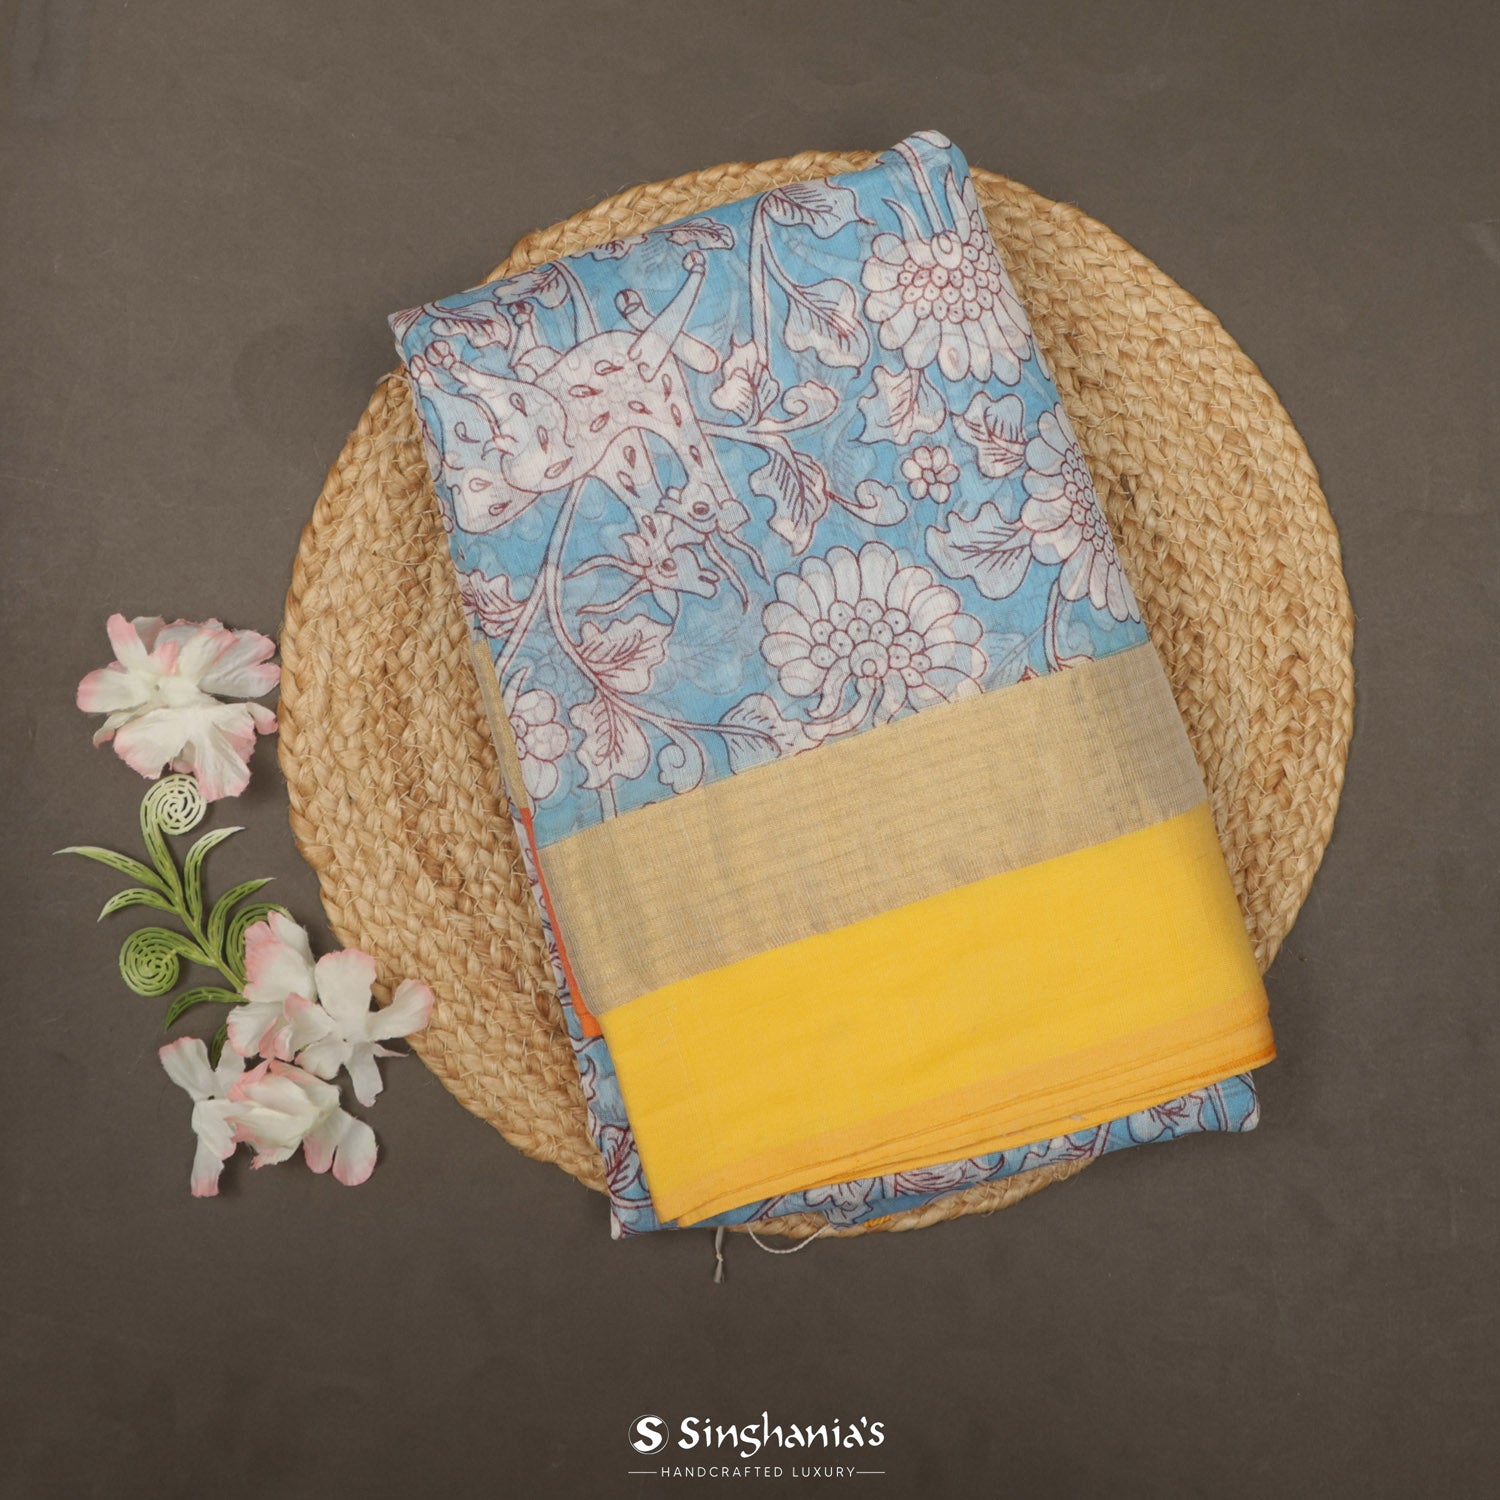 Baby Blue Cotton Saree With Printed Flora-Fauna-Inspired Design